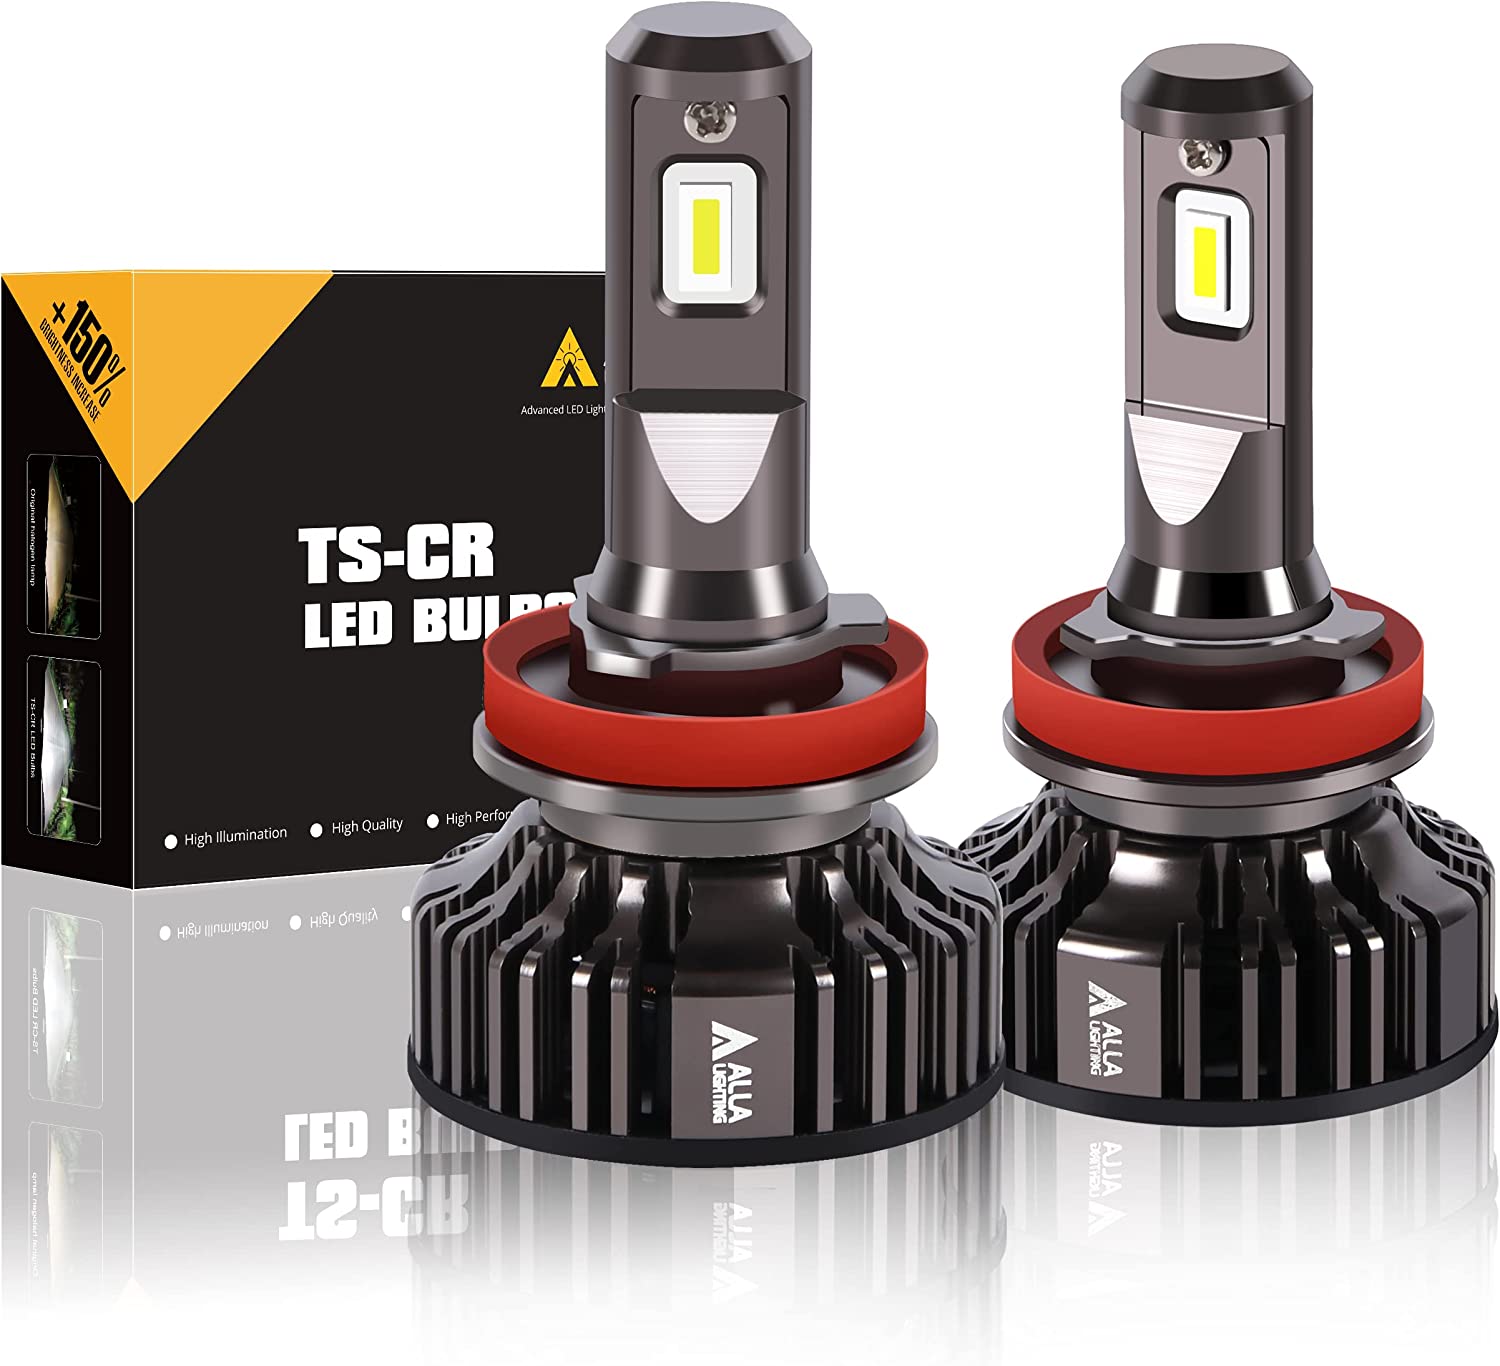 The Best and Brightest LED H11B Headlight Bulbs